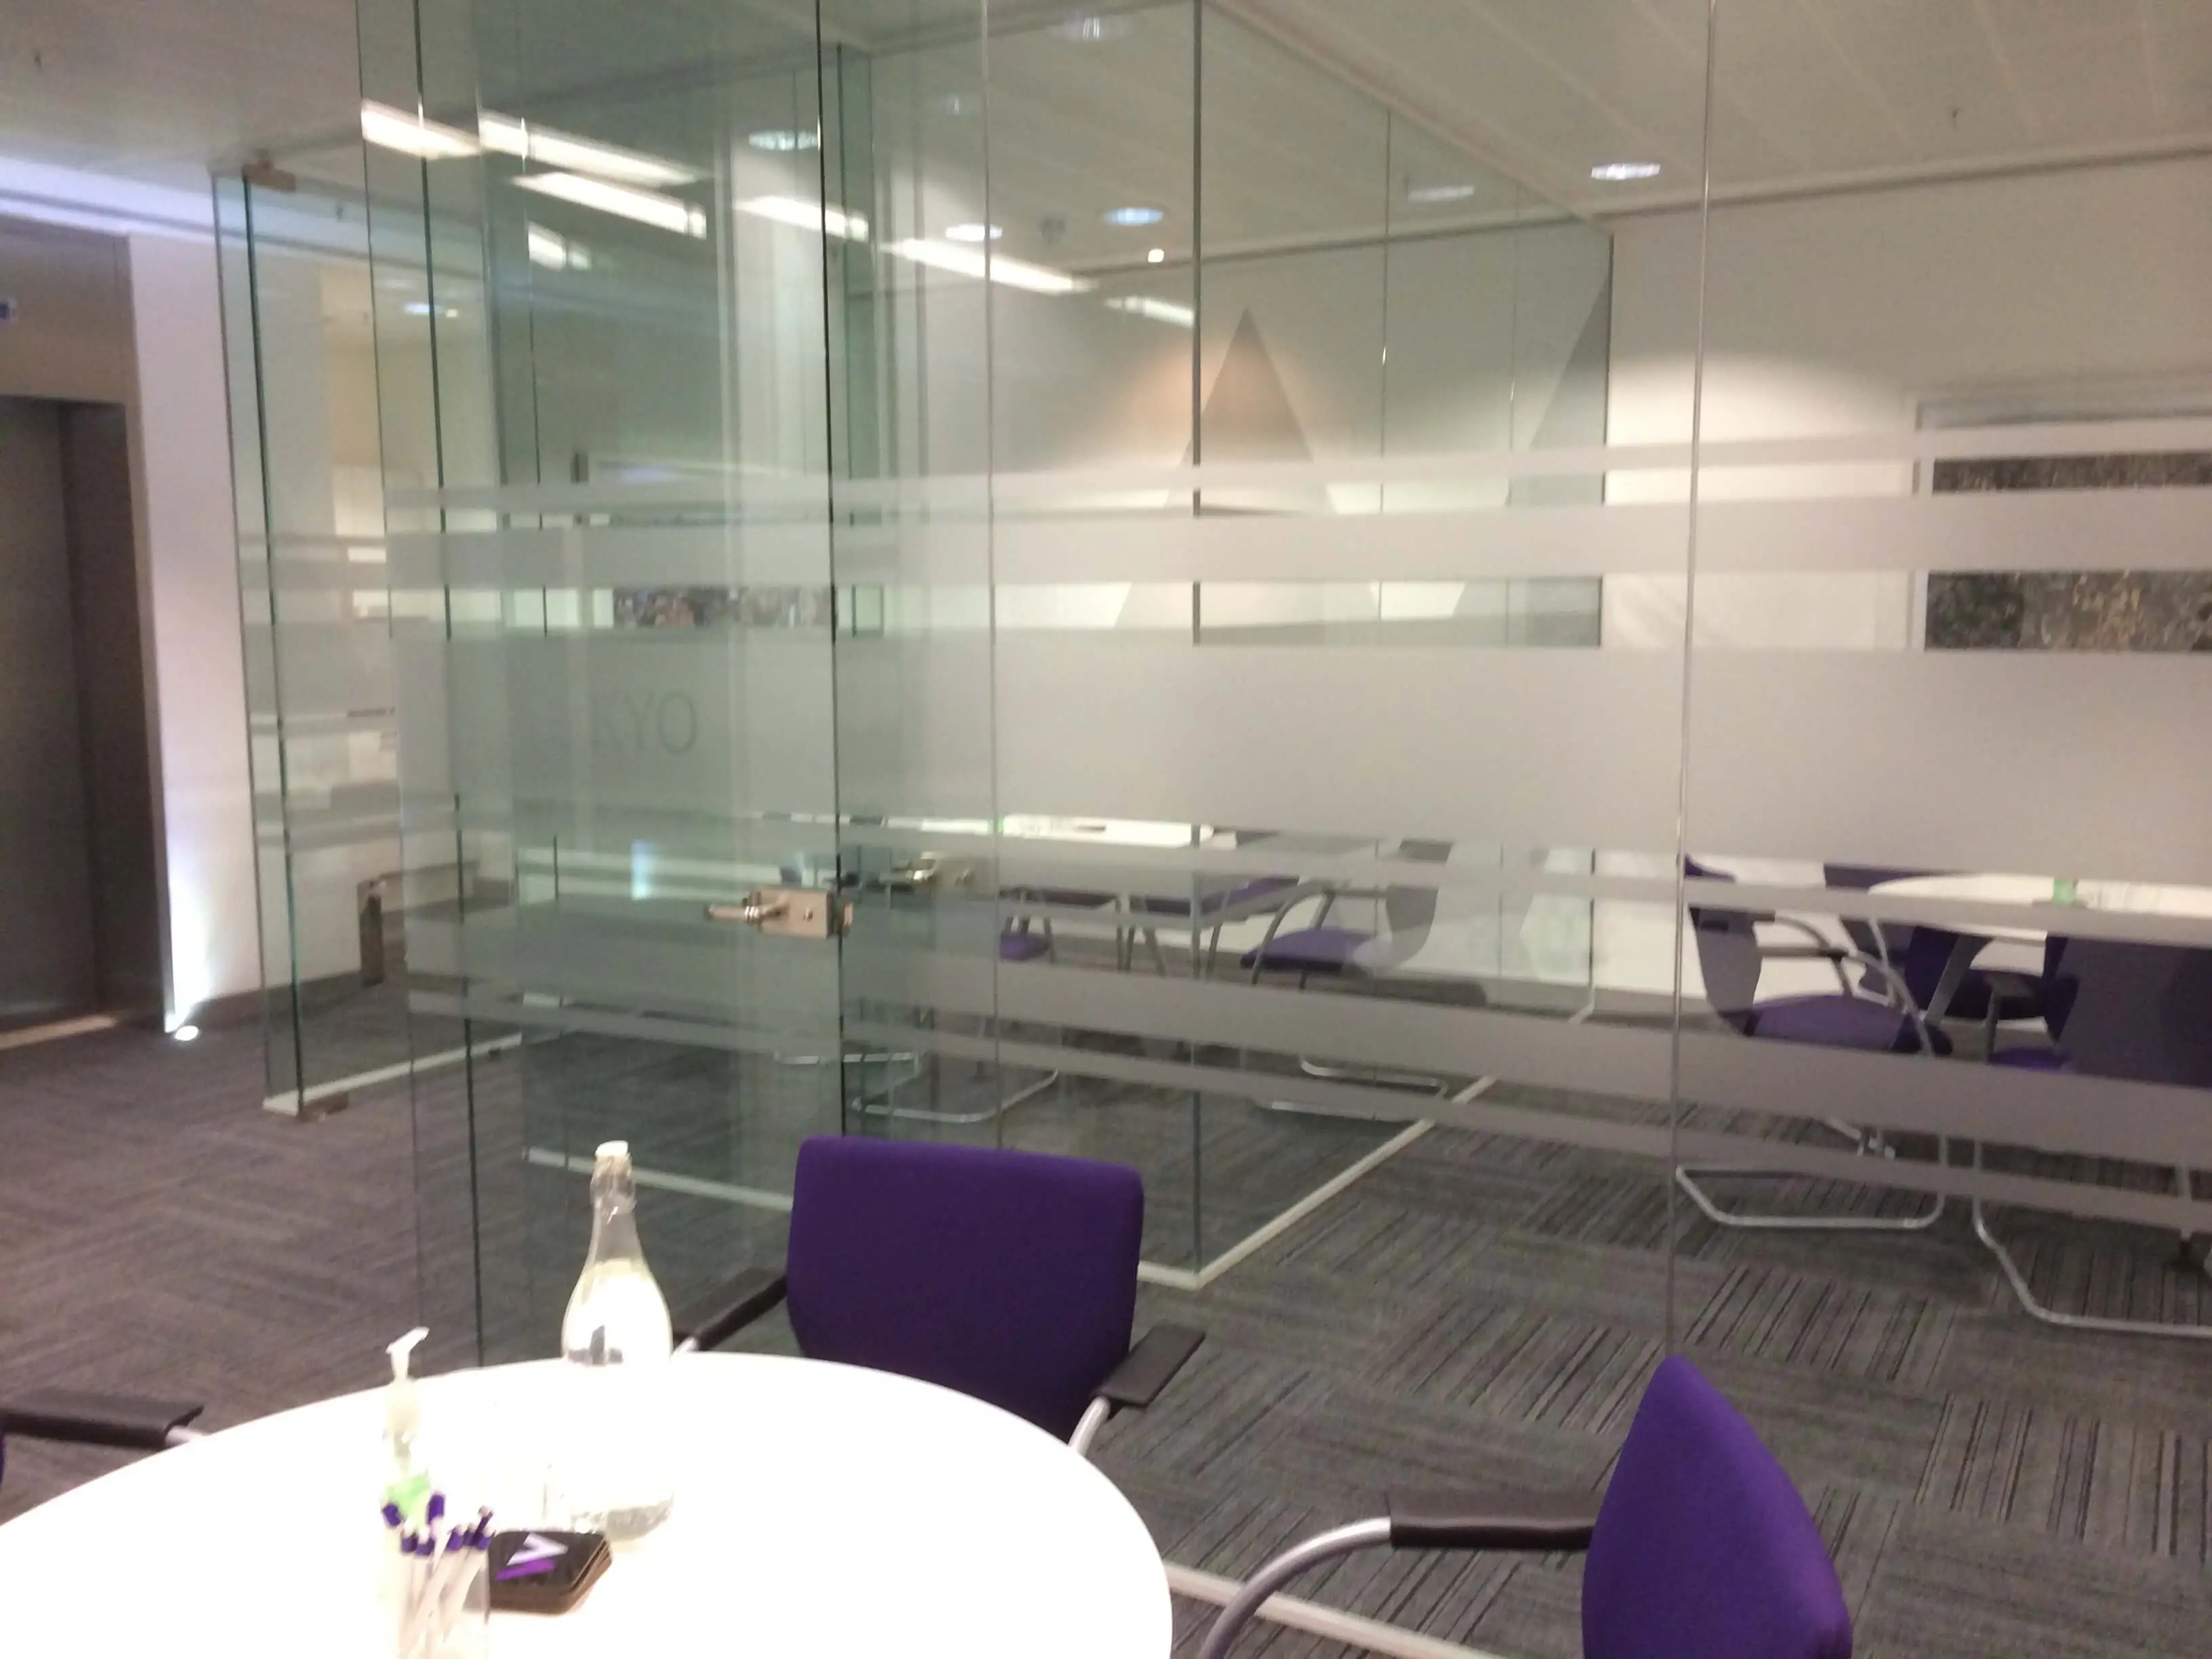 Meeting rooms with several tables chairs and glass partitions